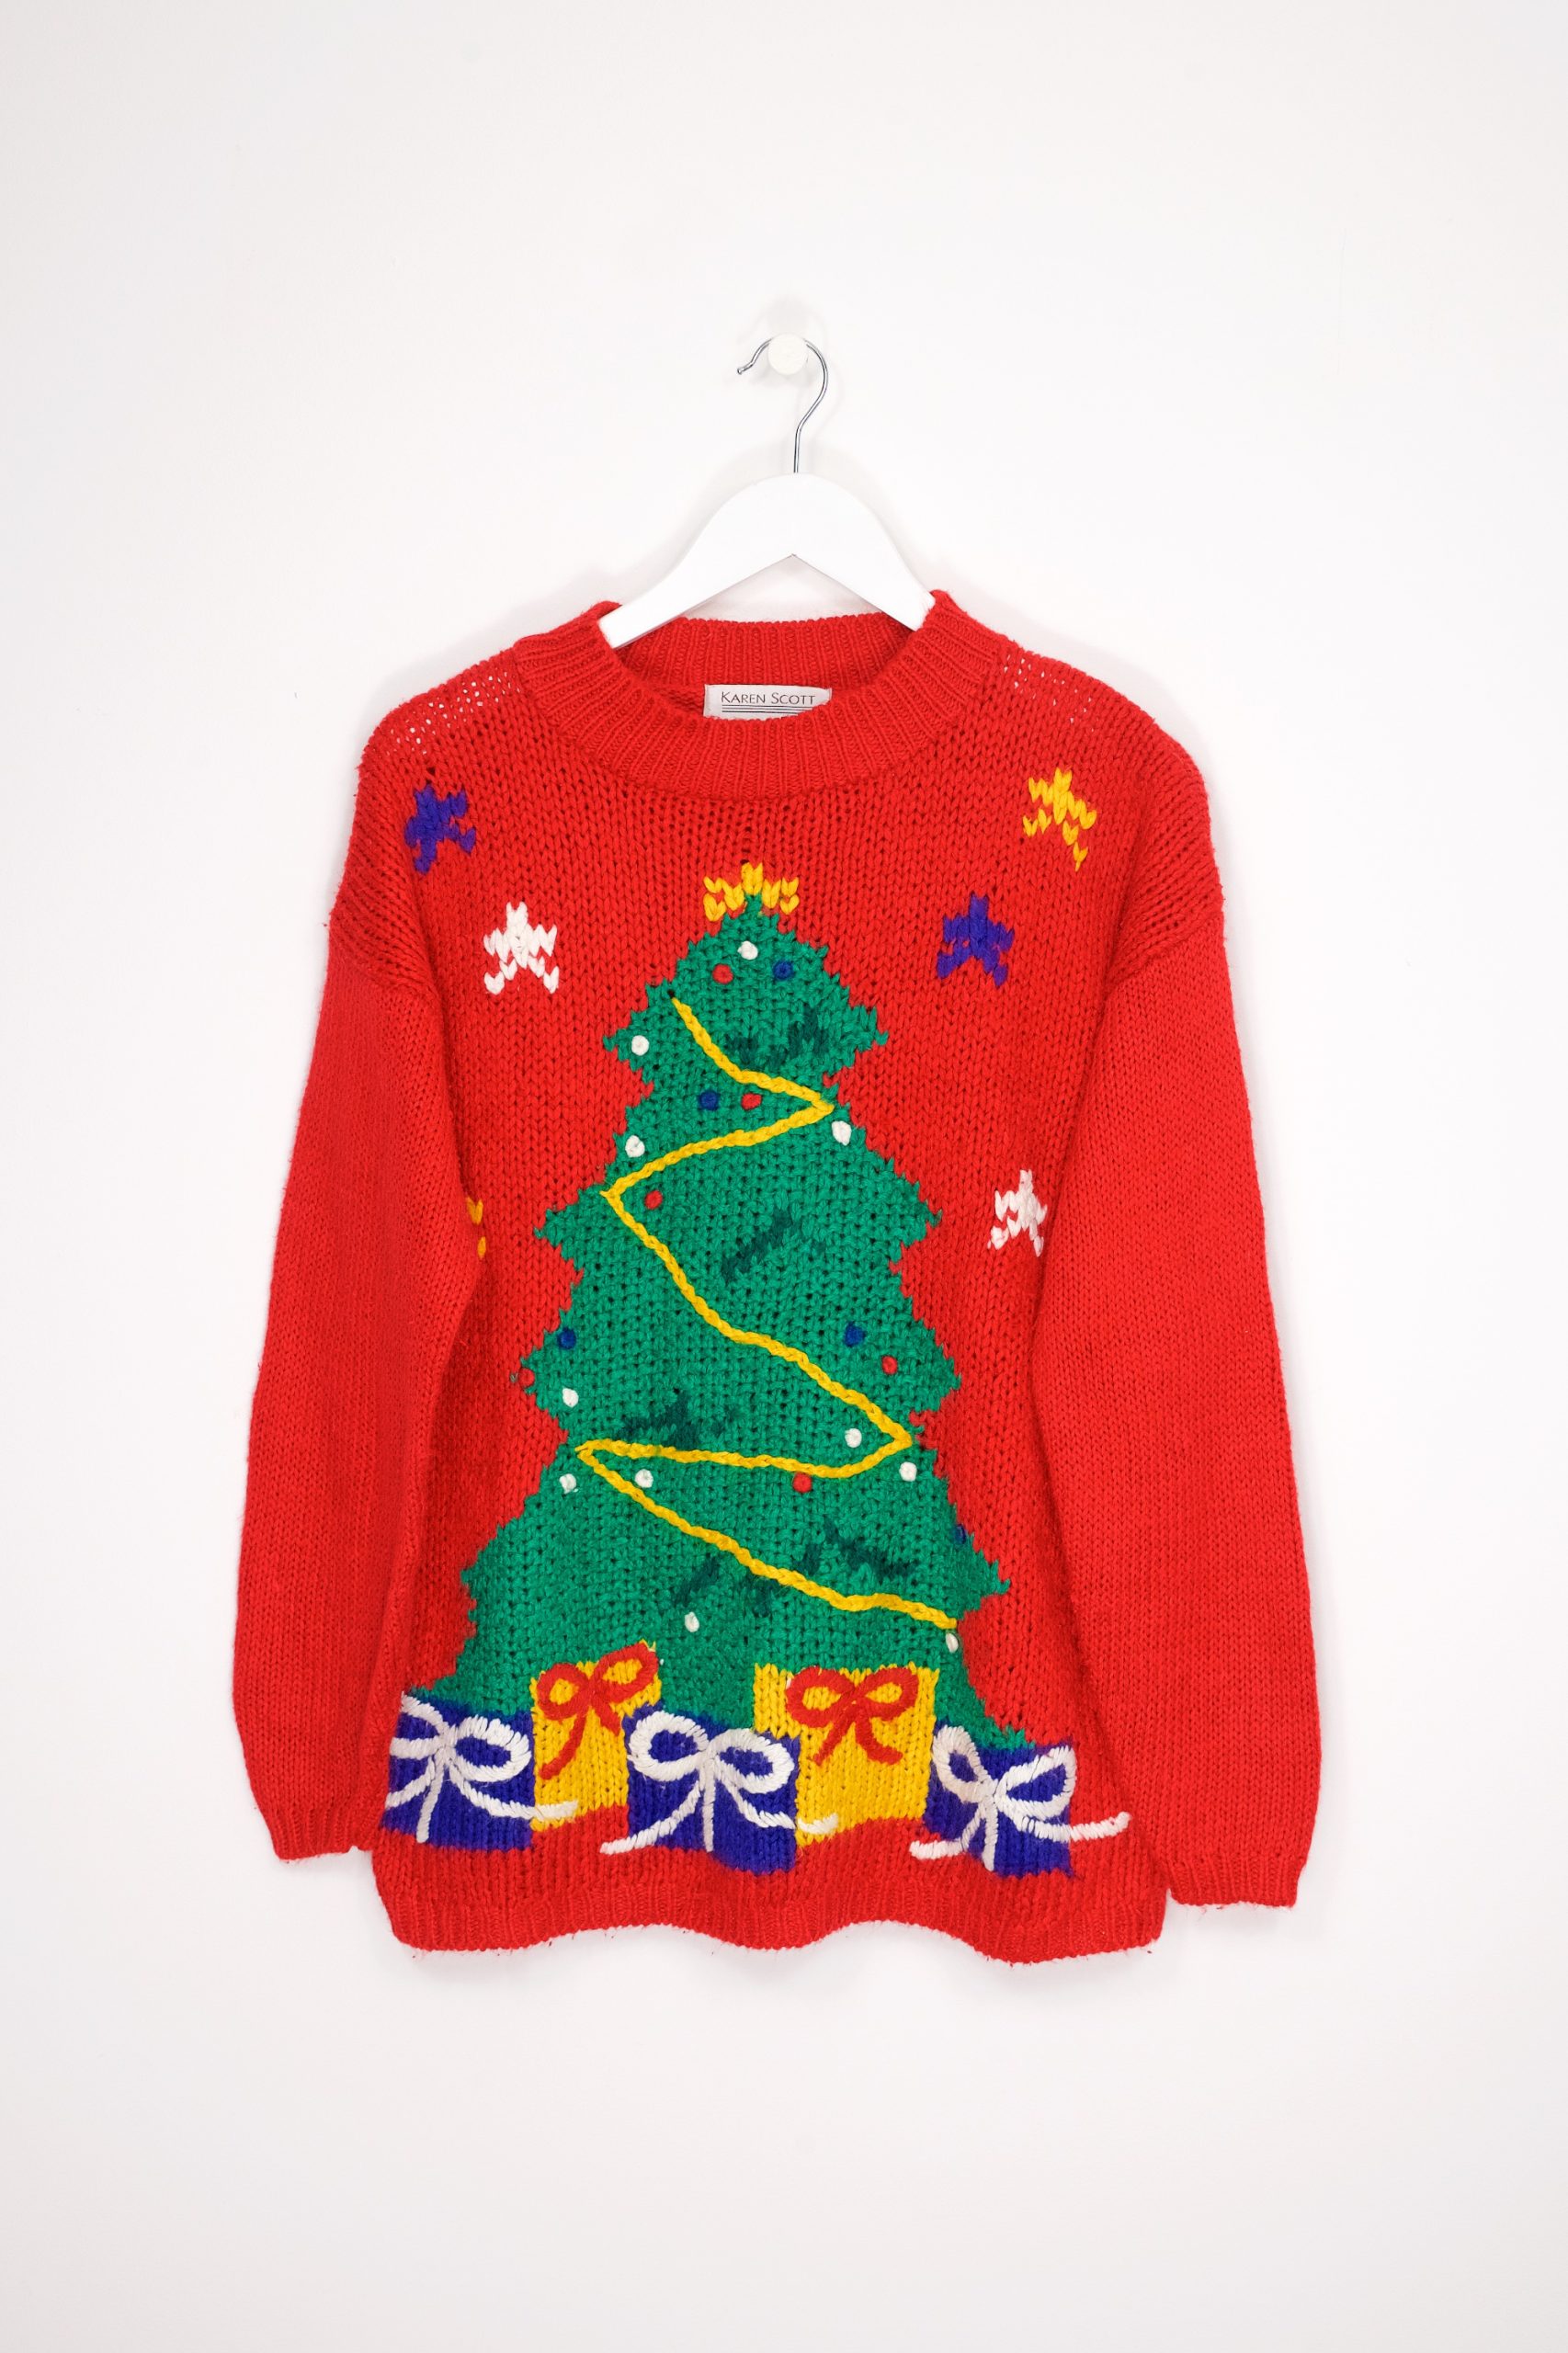 Pin On Christmas Sweaters, 53% OFF